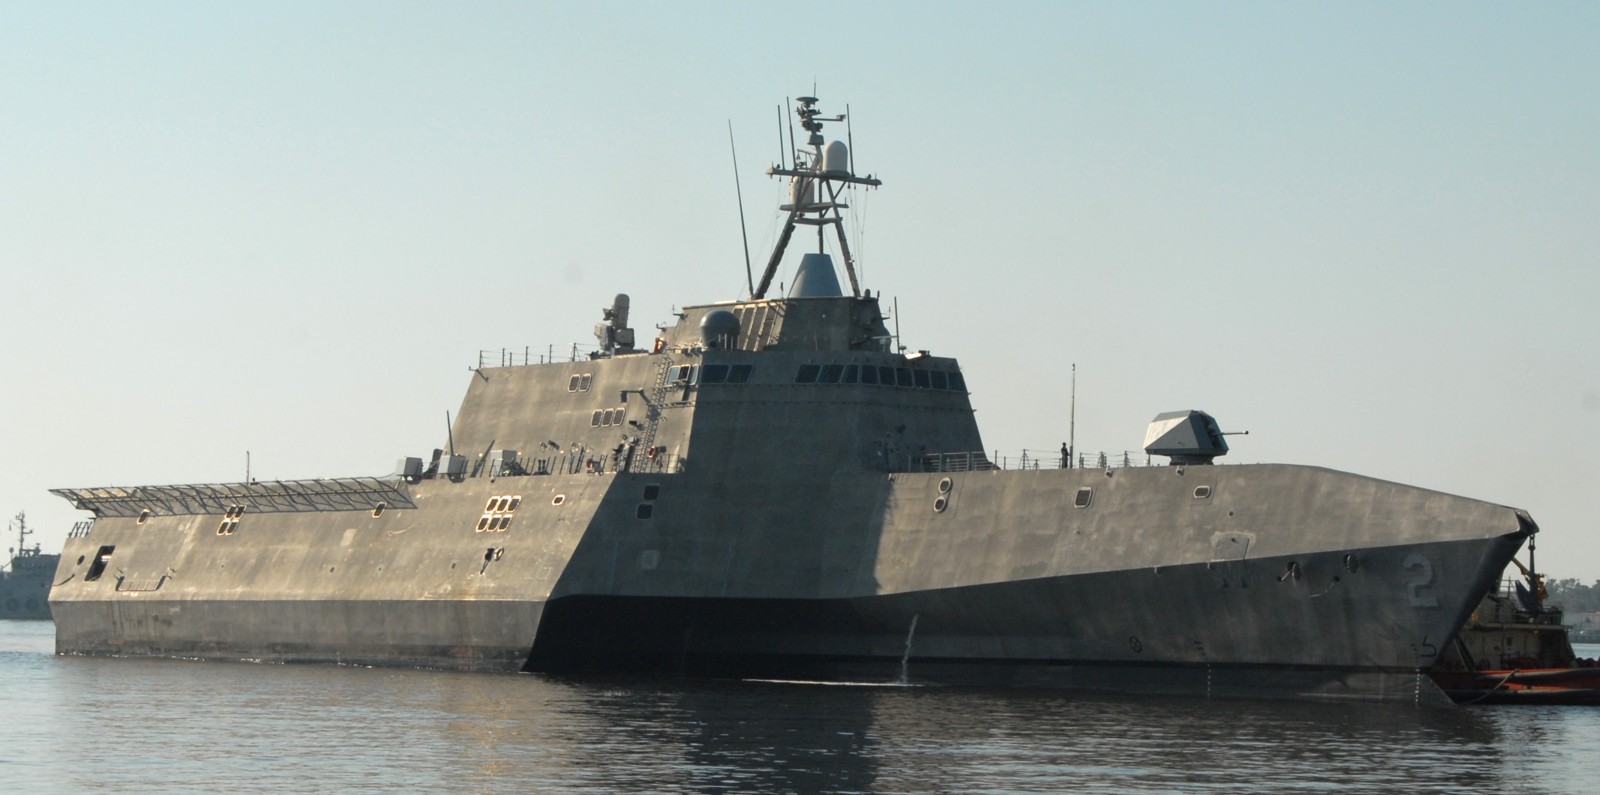 lcs-2 uss independence littoral combat ship us navy class 70a